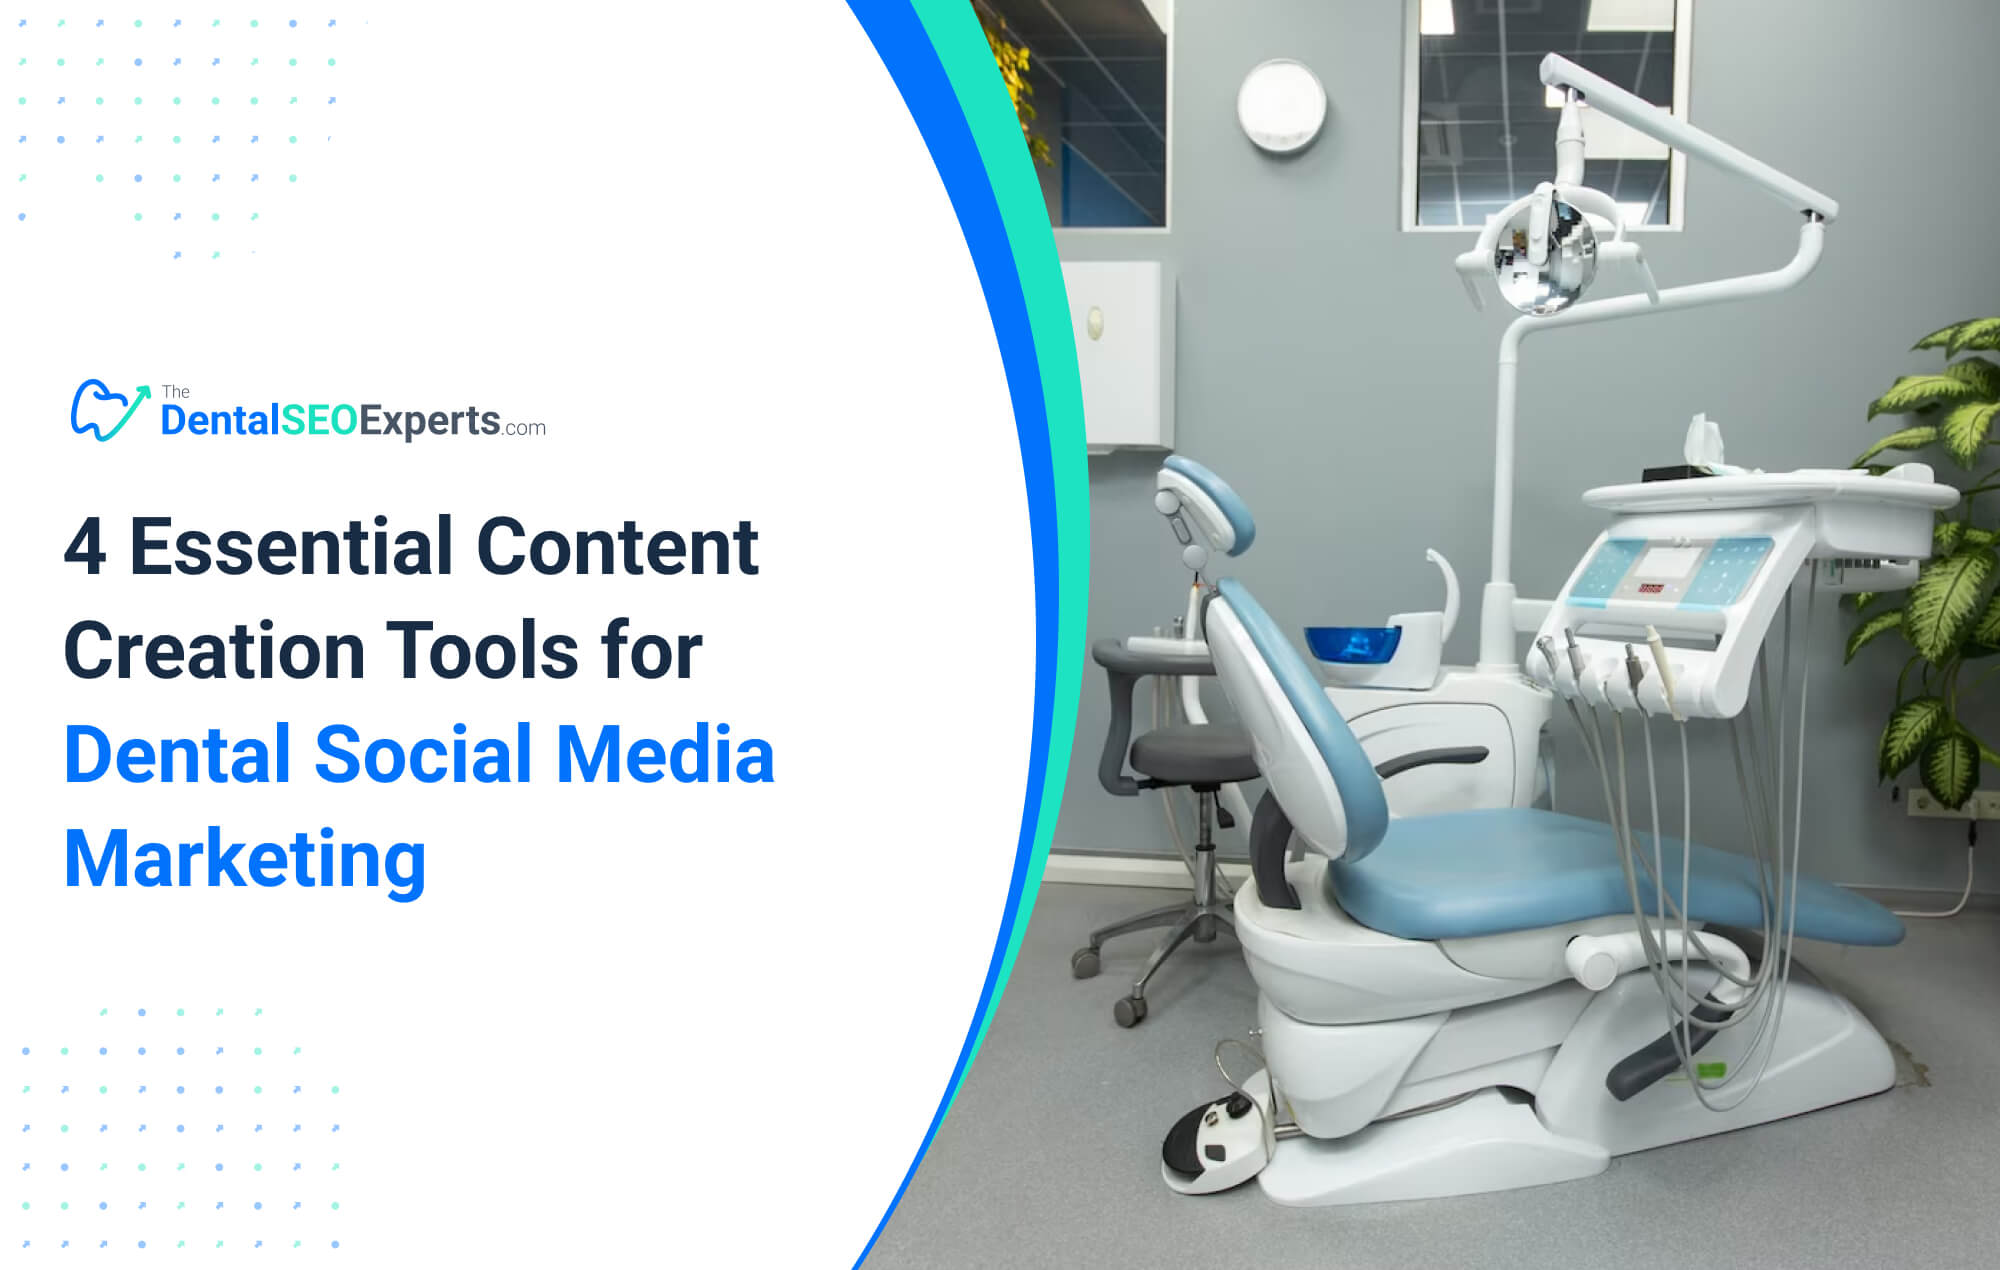 4 Essential Content Creation Tools for Your Dental Marketing